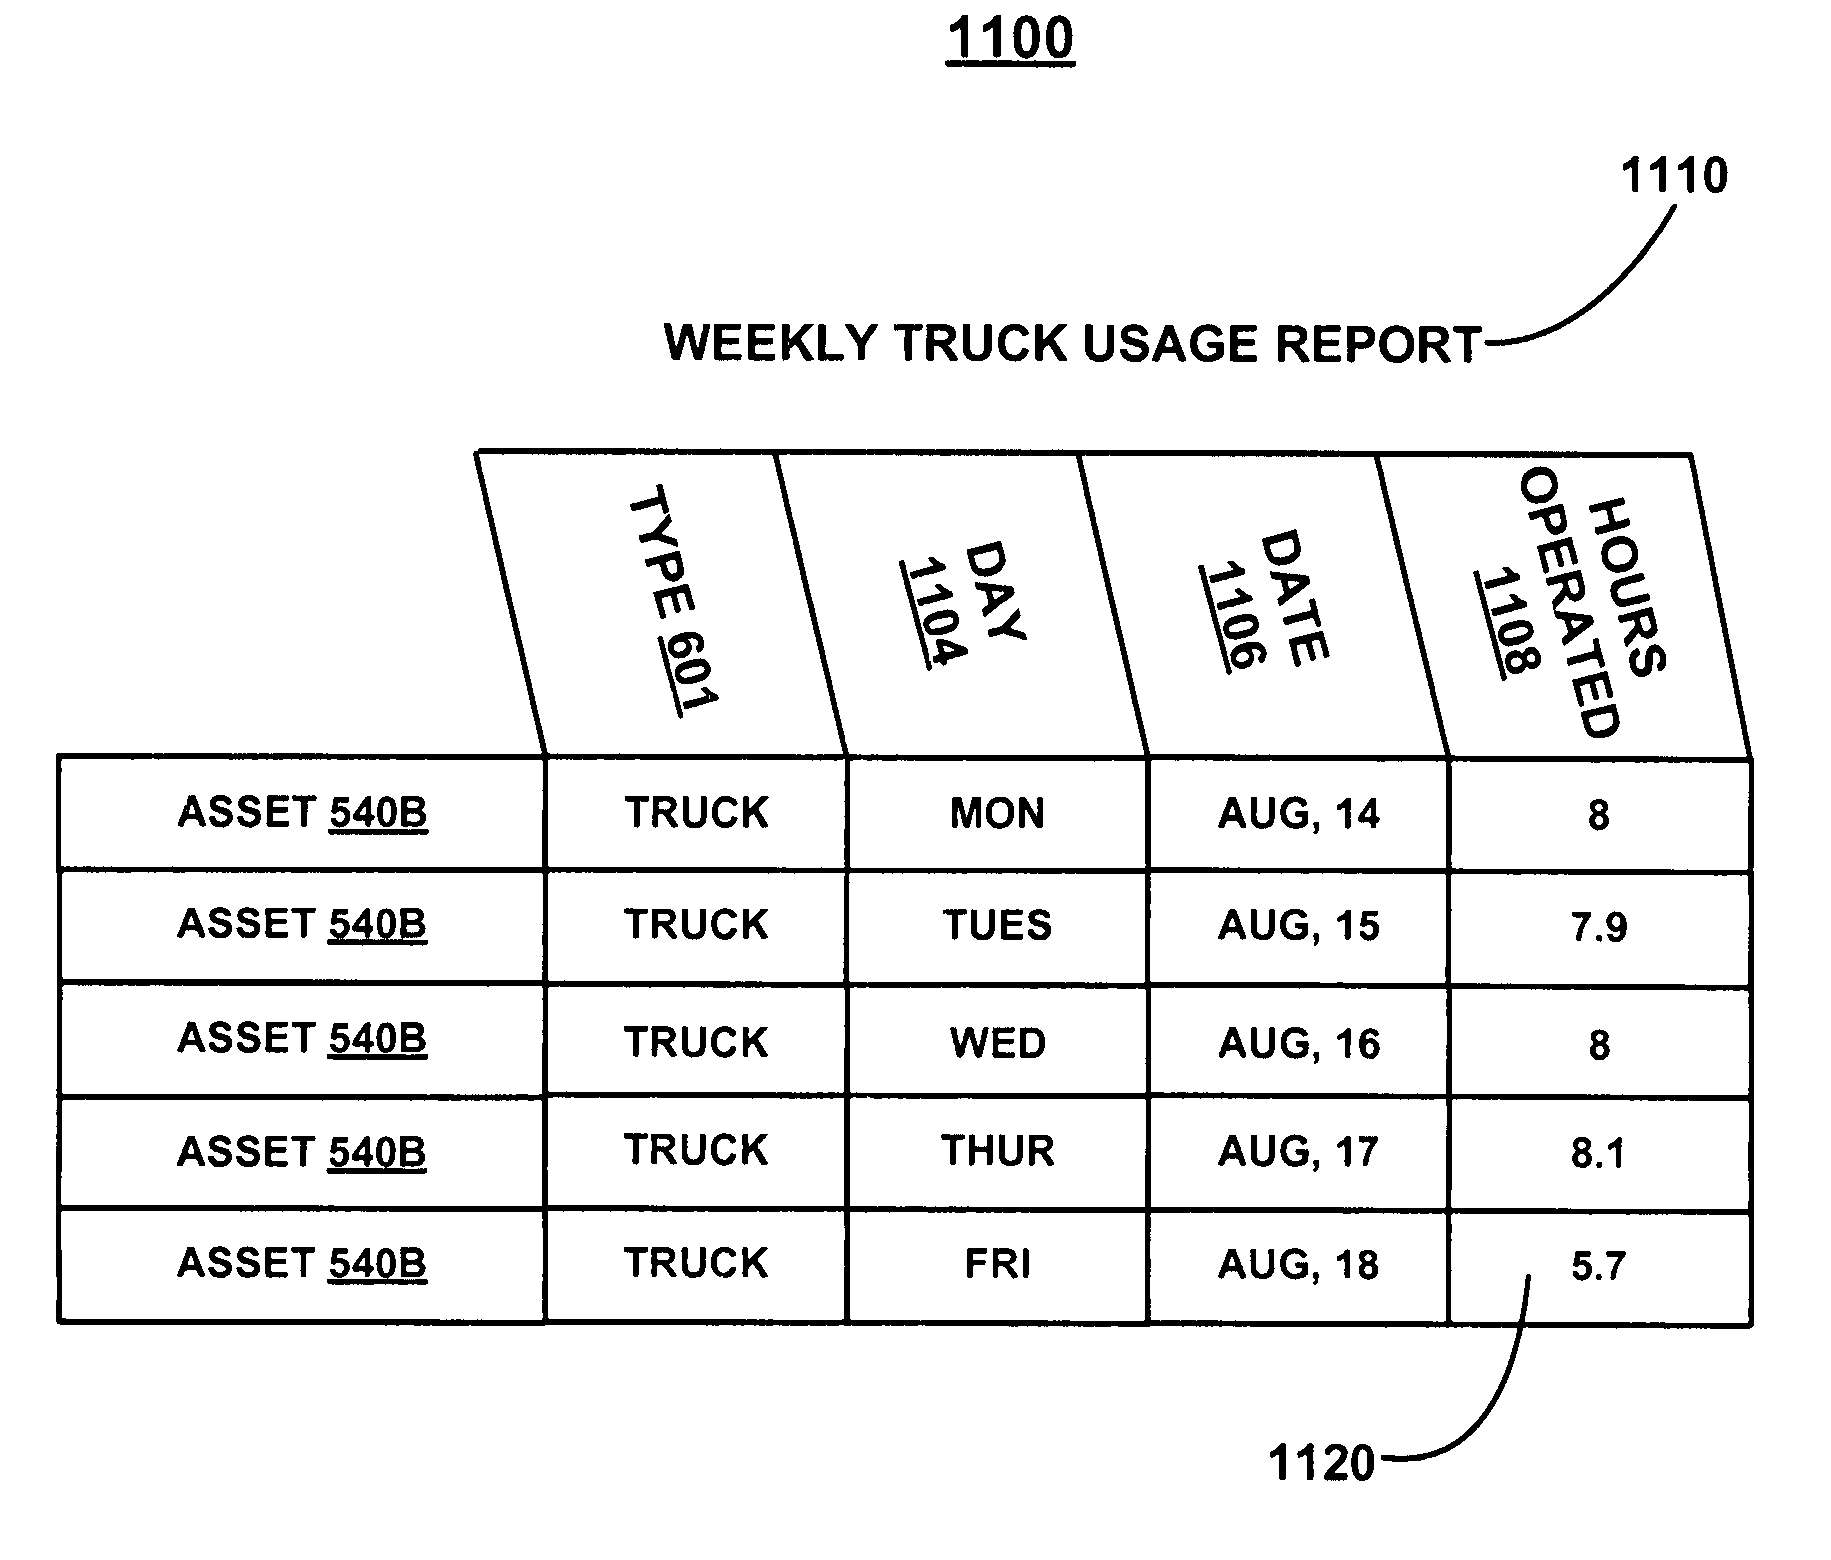 System and method for providing asset management information to a customer